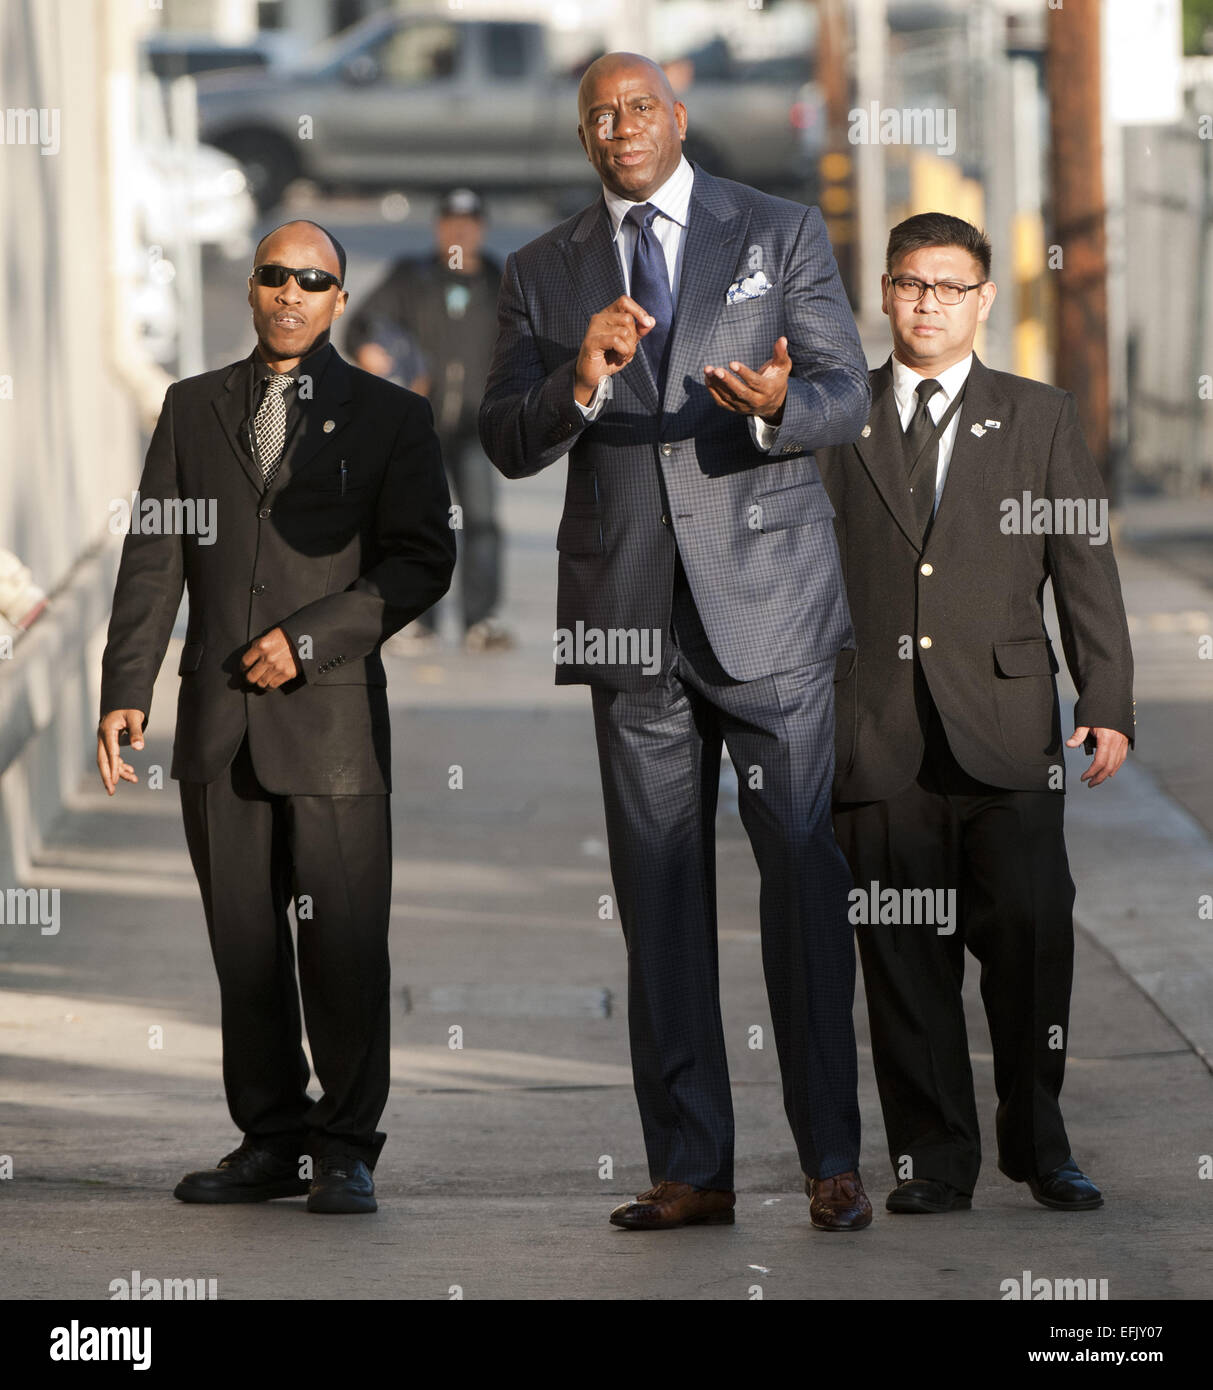 Hollywood, California, USA. 5th Feb, 2015. Former Lakers Basketball guard Magic Johnson, along with American actor, Scott Foley arrive at Jimmy Kimmel Live! in Hollywood, sneaking in and out on Thursday afternoon. Magic stopped momentarily to greet fans and sign autographs before going in for his appearance. Credit:  David Bro/ZUMA Wire/Alamy Live News Stock Photo